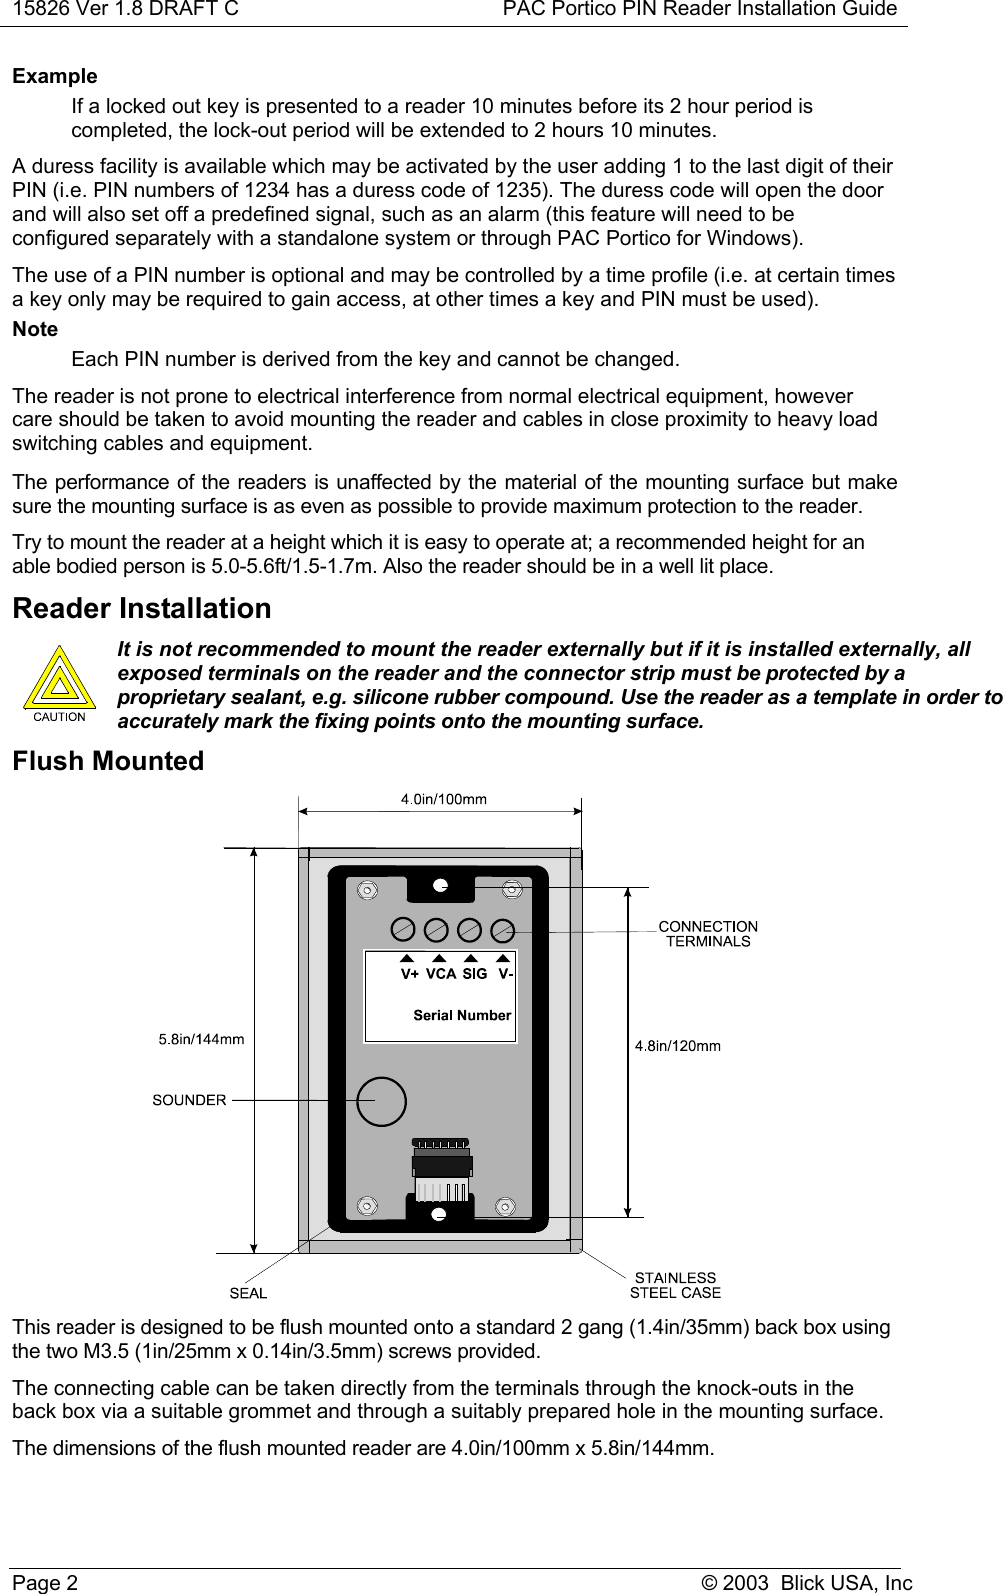 15826 Ver 1.8 DRAFT C PAC Portico PIN Reader Installation GuidePage 2 © 2003  Blick USA, IncExampleIf a locked out key is presented to a reader 10 minutes before its 2 hour period iscompleted, the lock-out period will be extended to 2 hours 10 minutes.A duress facility is available which may be activated by the user adding 1 to the last digit of theirPIN (i.e. PIN numbers of 1234 has a duress code of 1235). The duress code will open the doorand will also set off a predefined signal, such as an alarm (this feature will need to beconfigured separately with a standalone system or through PAC Portico for Windows).The use of a PIN number is optional and may be controlled by a time profile (i.e. at certain timesa key only may be required to gain access, at other times a key and PIN must be used).NoteEach PIN number is derived from the key and cannot be changed.The reader is not prone to electrical interference from normal electrical equipment, howevercare should be taken to avoid mounting the reader and cables in close proximity to heavy loadswitching cables and equipment.The performance of the readers is unaffected by the material of the mounting surface but makesure the mounting surface is as even as possible to provide maximum protection to the reader.Try to mount the reader at a height which it is easy to operate at; a recommended height for anable bodied person is 5.0-5.6ft/1.5-1.7m. Also the reader should be in a well lit place.Reader Installation It is not recommended to mount the reader externally but if it is installed externally, allexposed terminals on the reader and the connector strip must be protected by aproprietary sealant, e.g. silicone rubber compound. Use the reader as a template in order toaccurately mark the fixing points onto the mounting surface.Flush MountedThis reader is designed to be flush mounted onto a standard 2 gang (1.4in/35mm) back box usingthe two M3.5 (1in/25mm x 0.14in/3.5mm) screws provided.The connecting cable can be taken directly from the terminals through the knock-outs in theback box via a suitable grommet and through a suitably prepared hole in the mounting surface.The dimensions of the flush mounted reader are 4.0in/100mm x 5.8in/144mm.